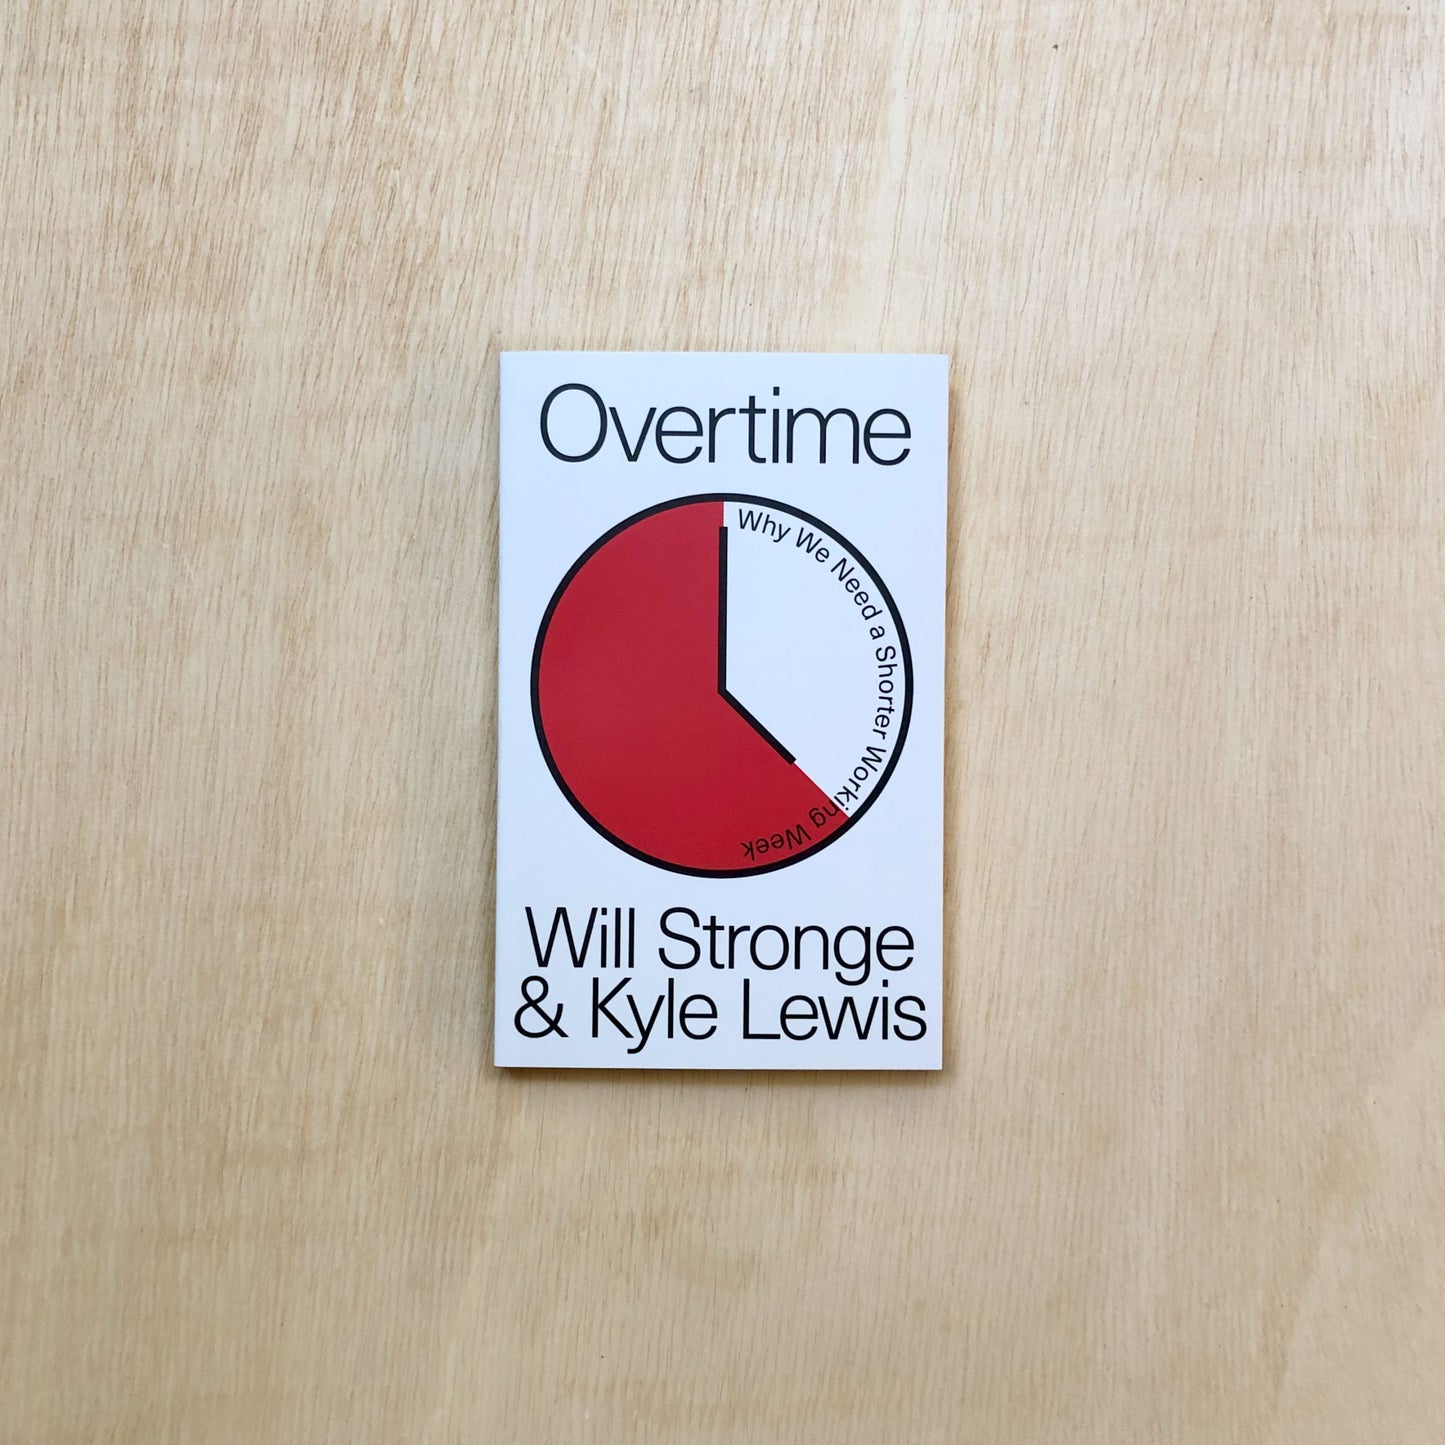 Overtime - Why We Need A Shorter Working Week